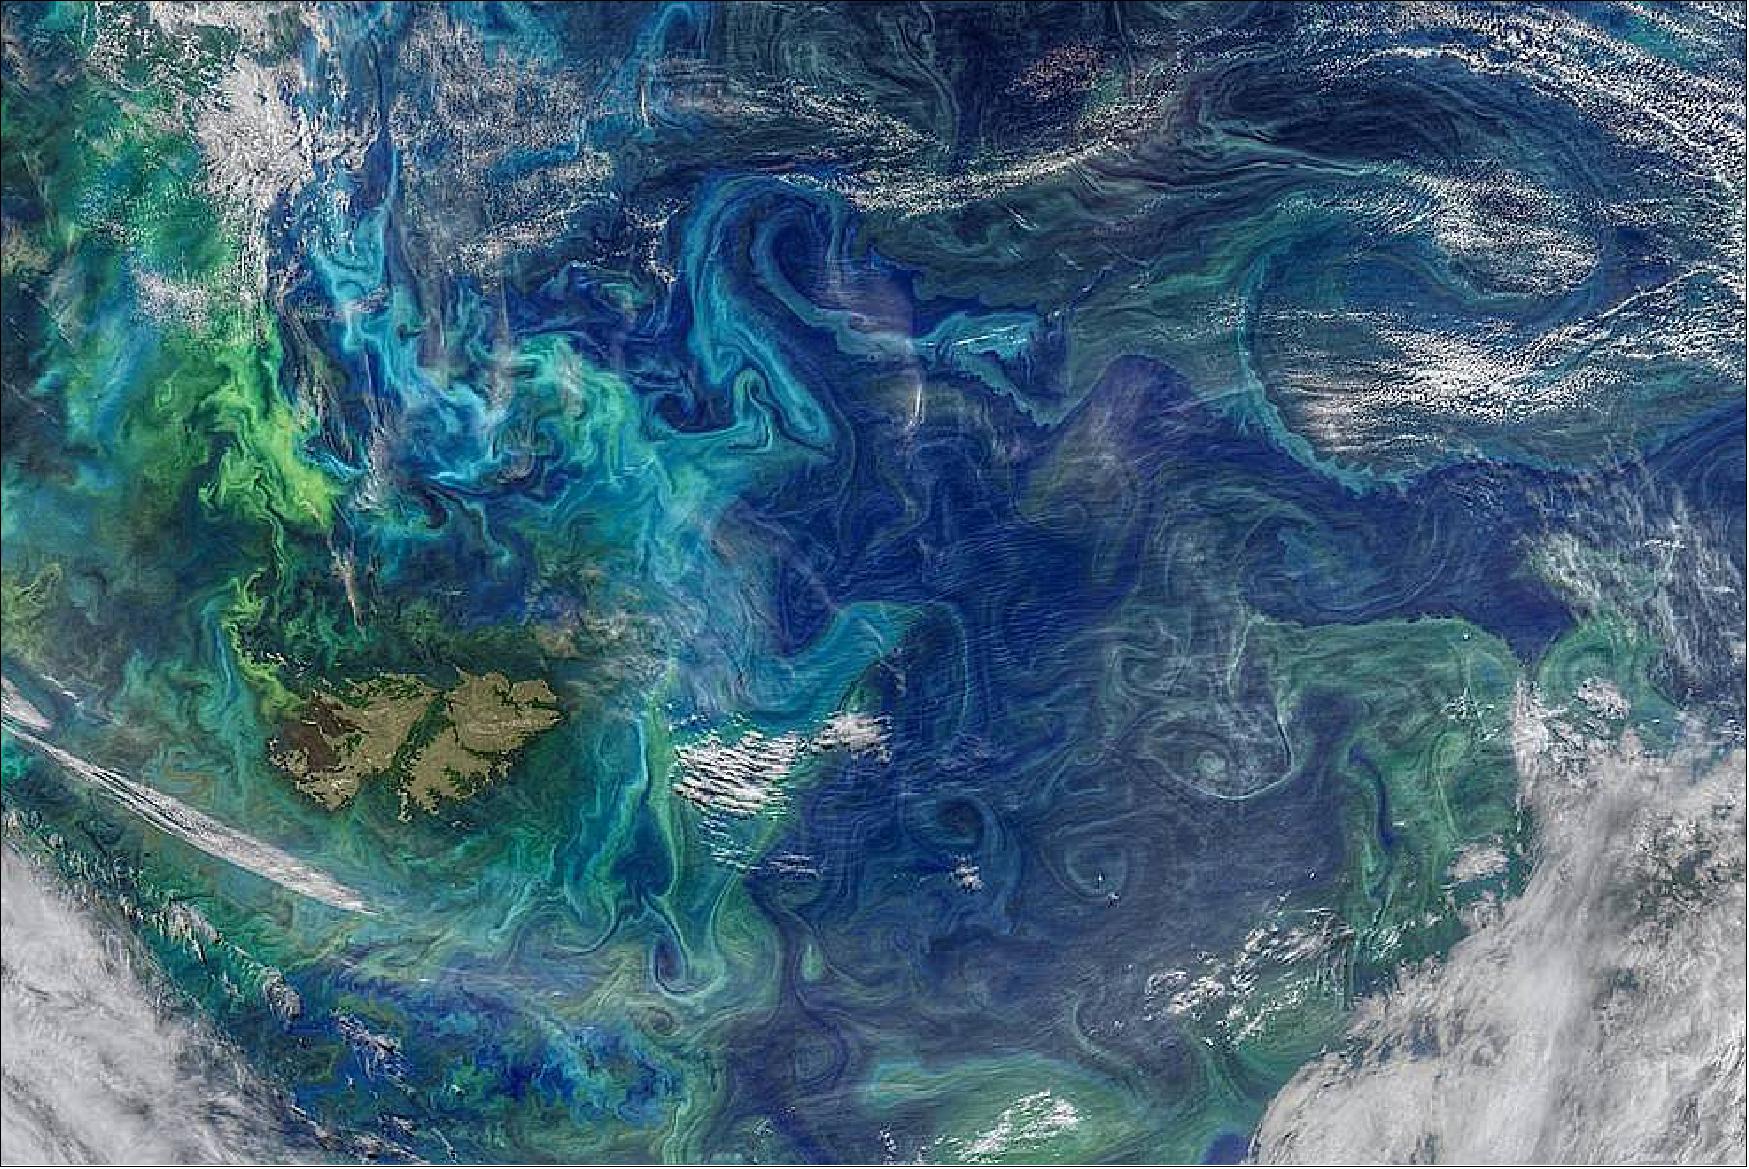 Figure 17: Sub-mesoscale ocean dynamics, like eddies and small currents, are responsible for the swirling pattern of these phytoplankton blooms (shown in green and light blue) in the South Atlantic Ocean on Jan. 5, 2021 (image credits: NASA’s Goddard Space Flight Center Ocean Color, using data from the NOAA-20 satellite and the joint NASA-NOAA Suomi NPP satellite)